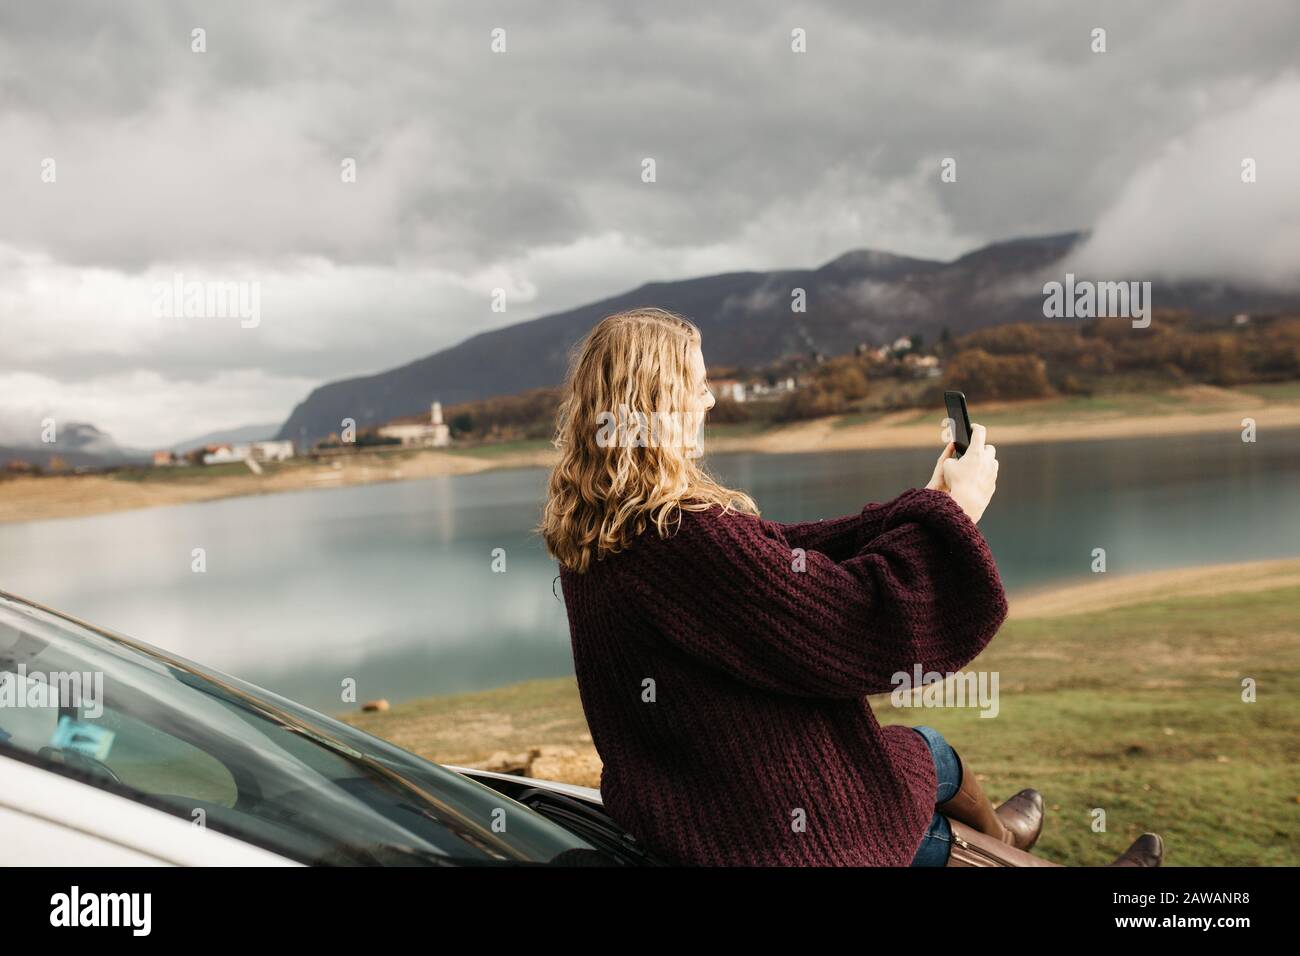 Beautiful woman with curly hair, sitting on the car, holding mobile phone and taking photos of lake on a cloudy day. She is texting on smartphone and Stock Photo